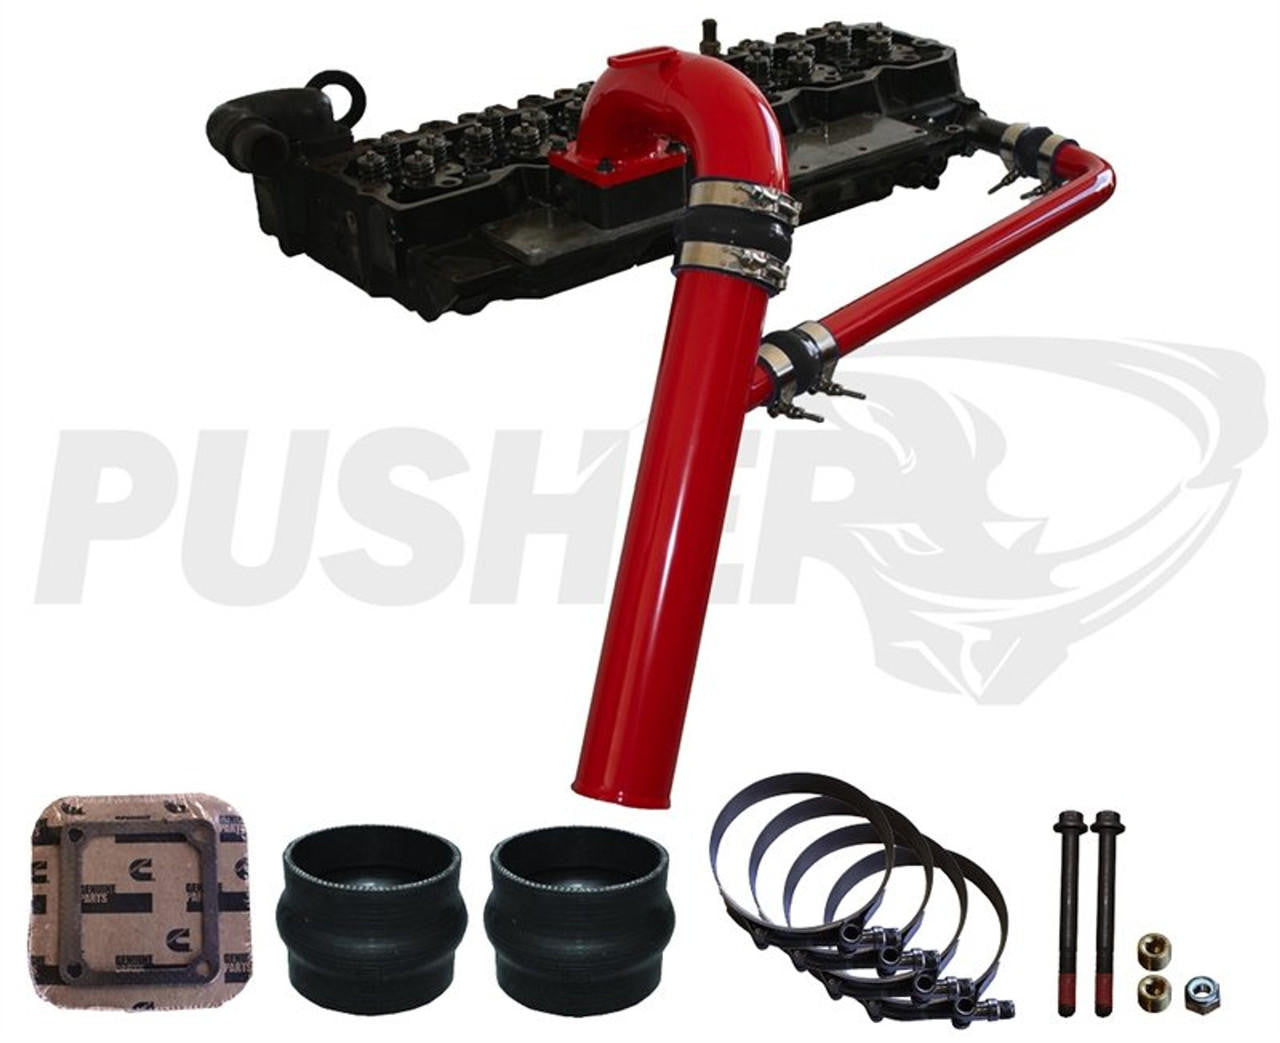 Pusher Intakes Pusher 3" Intake Manifold with 3" Cross-Air Package for 1998.5-2002 Dodge Cummins VAR-PDC9802CAK 